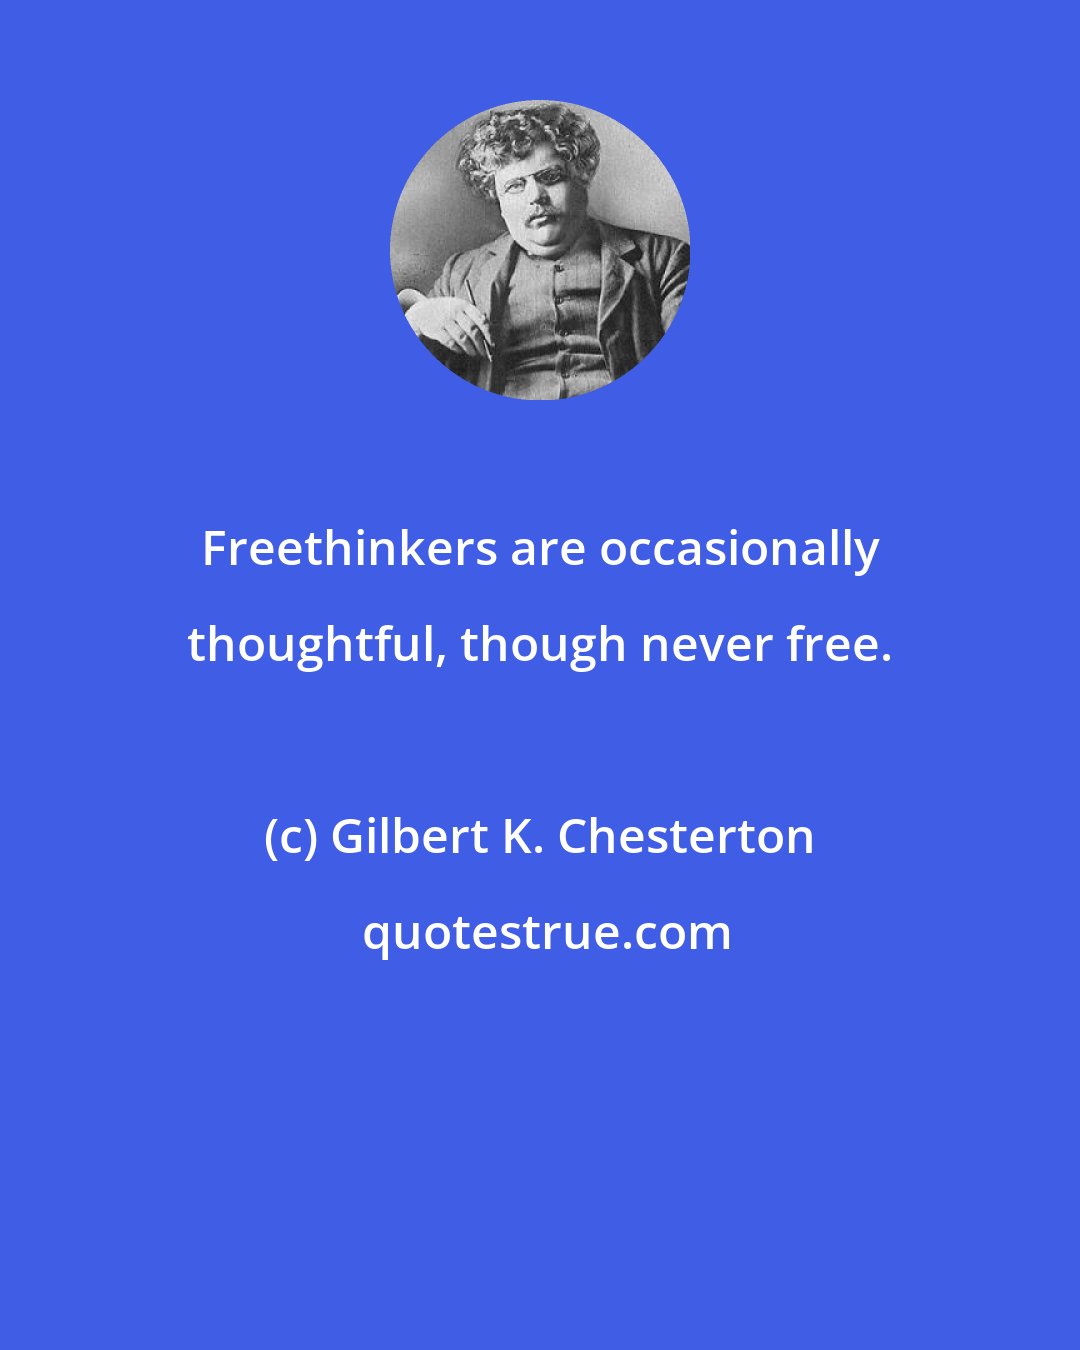 Gilbert K. Chesterton: Freethinkers are occasionally thoughtful, though never free.